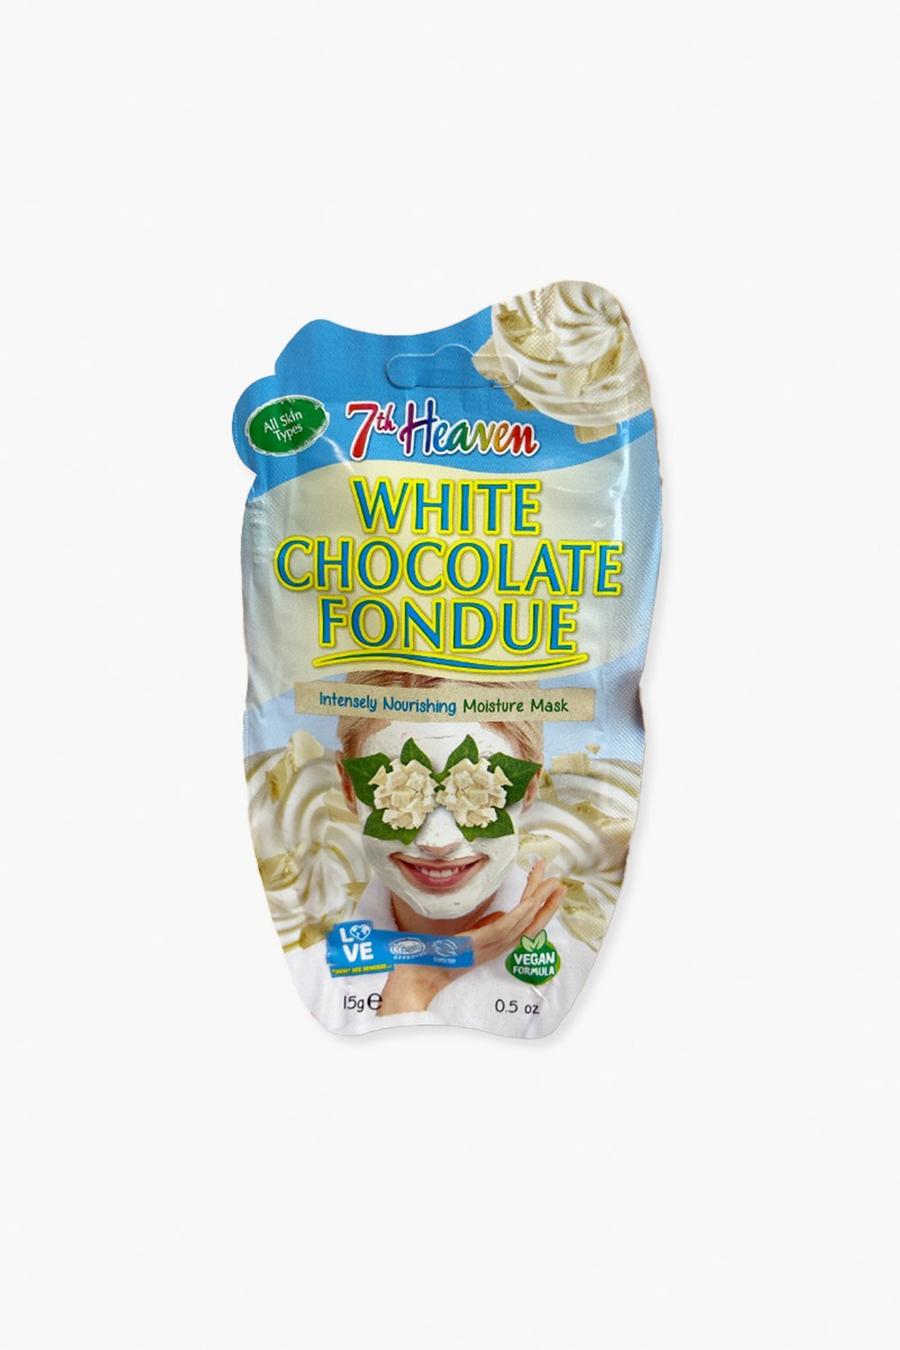 7TH HEAVEN WHITE CHOCOLATE FONDUE FASK MASK image number 1